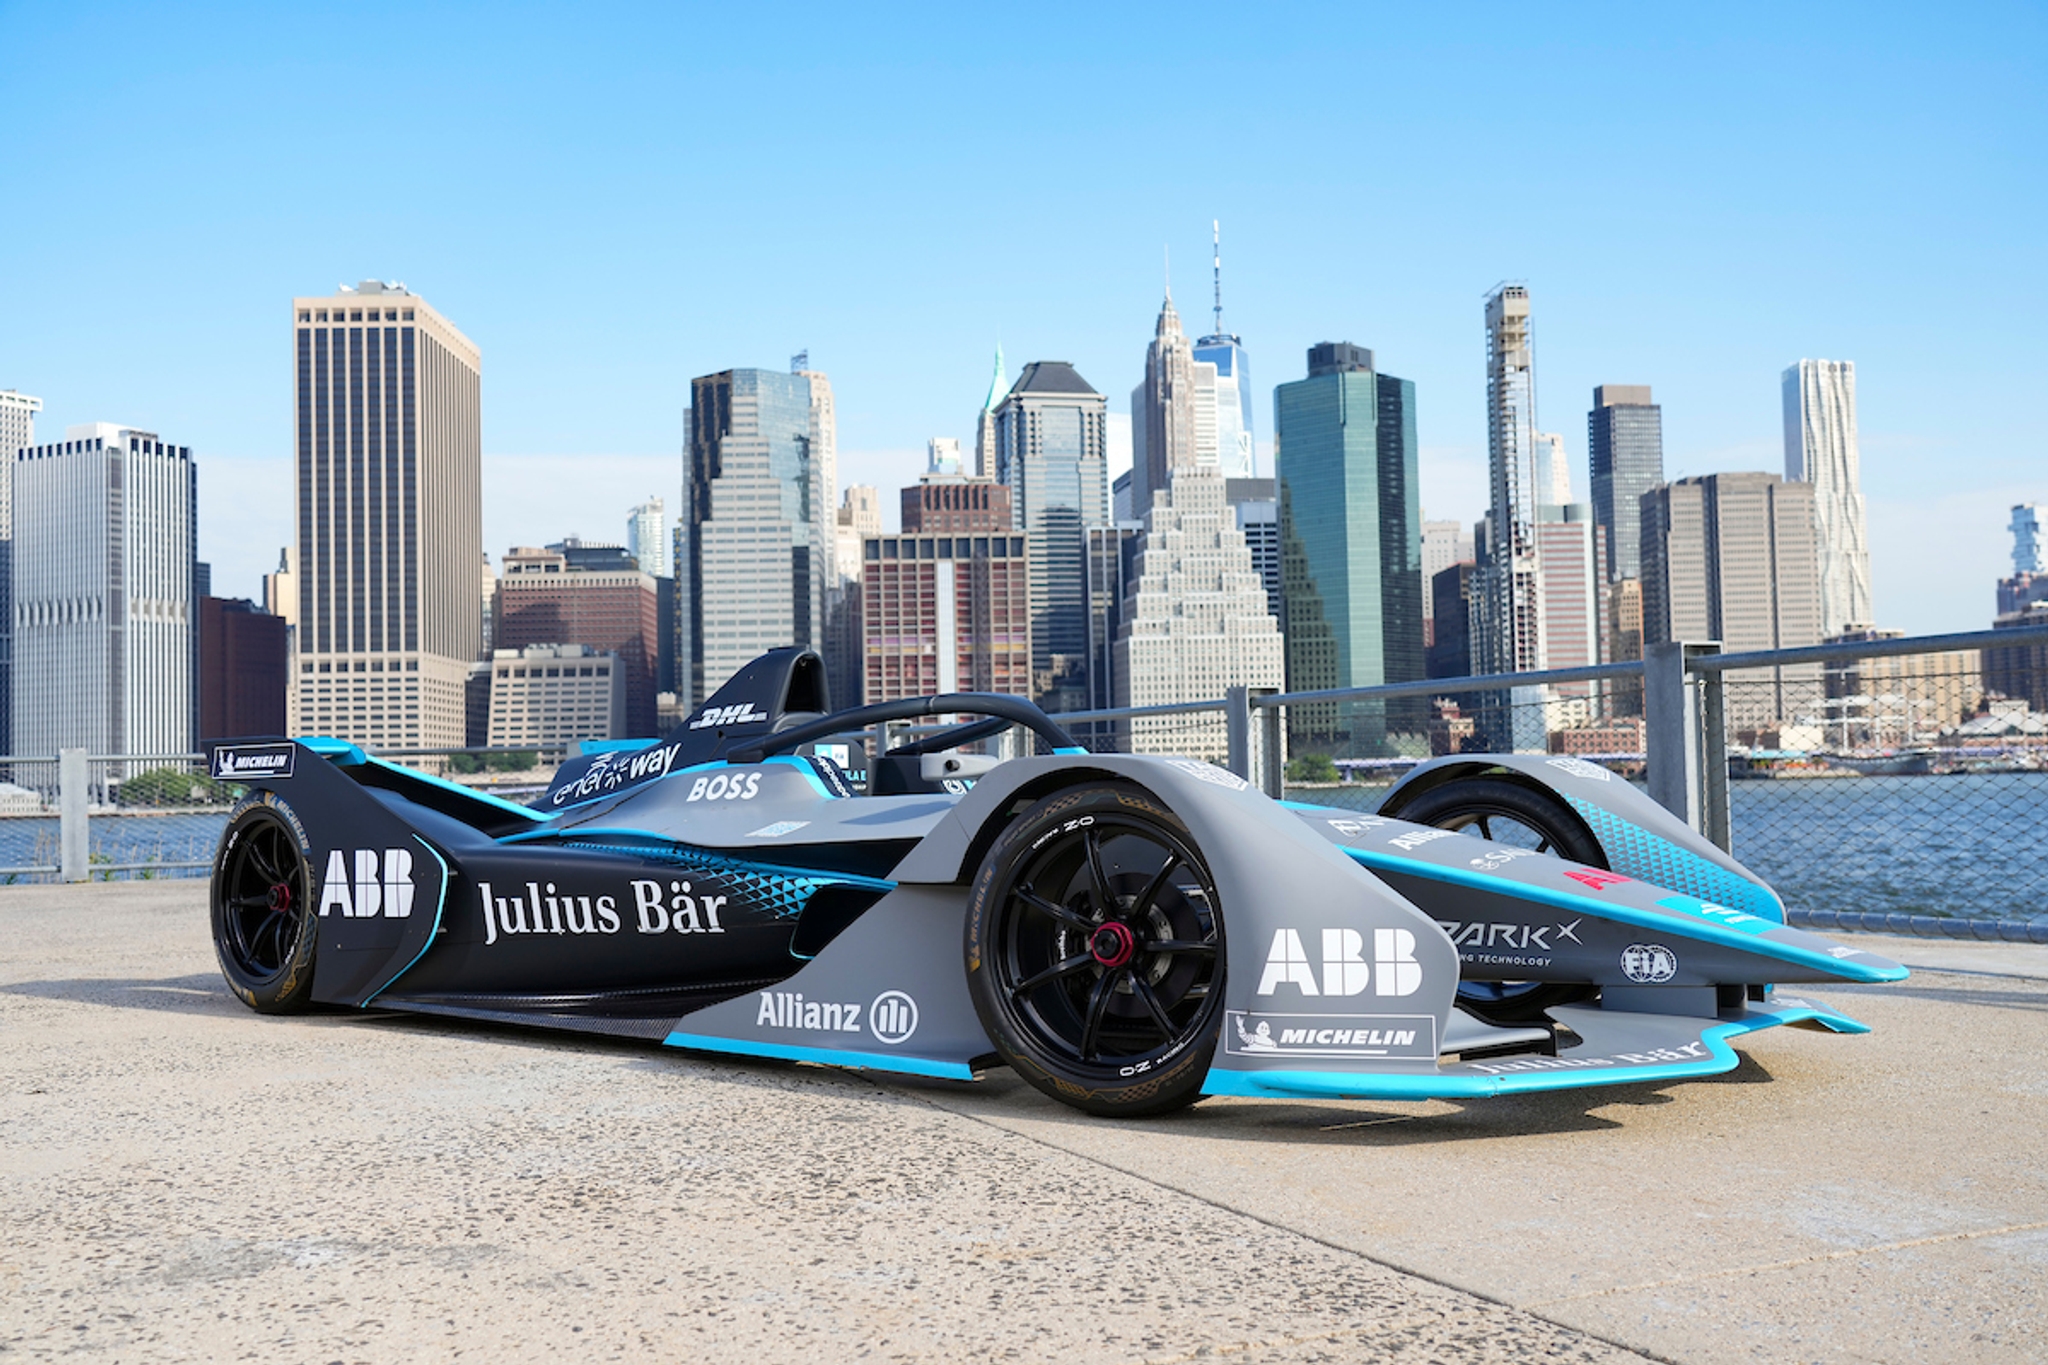 A big horsepower jump and more changes to come for Formula E in 2023 ...